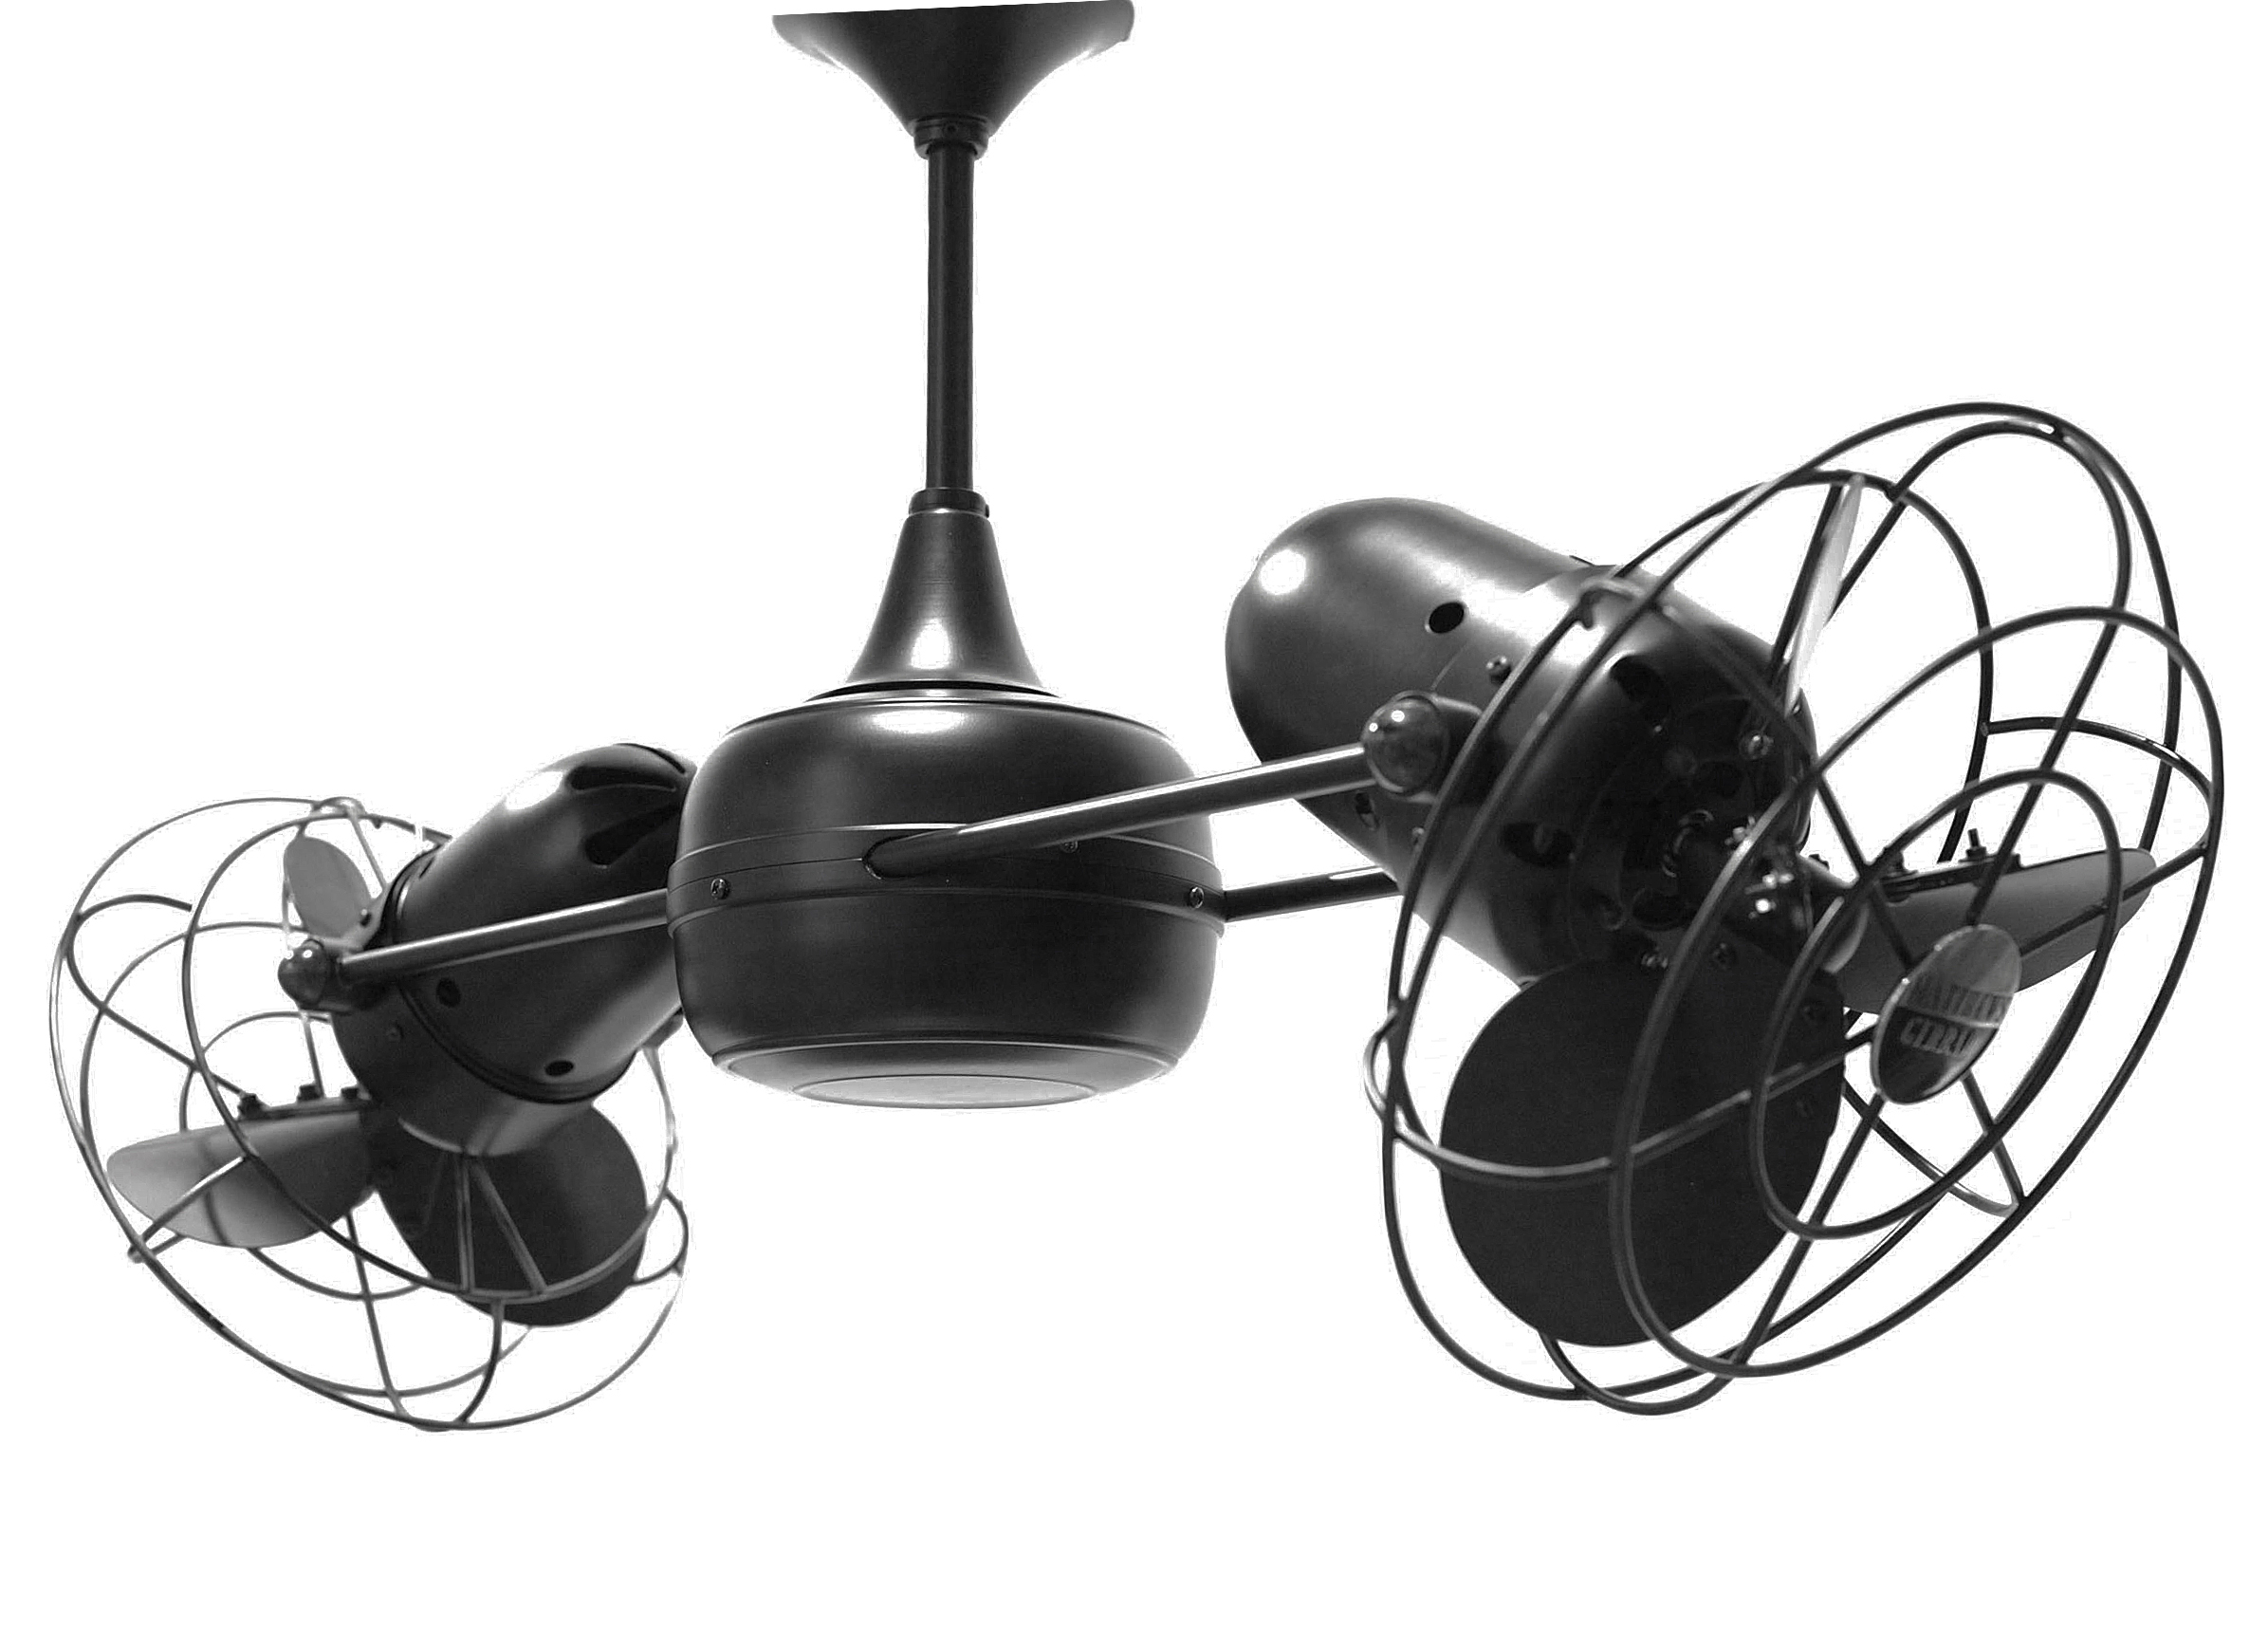 Duplo Dinamico Rotational Dual Head Ceiling Fan in Black Finish with Metal Blades